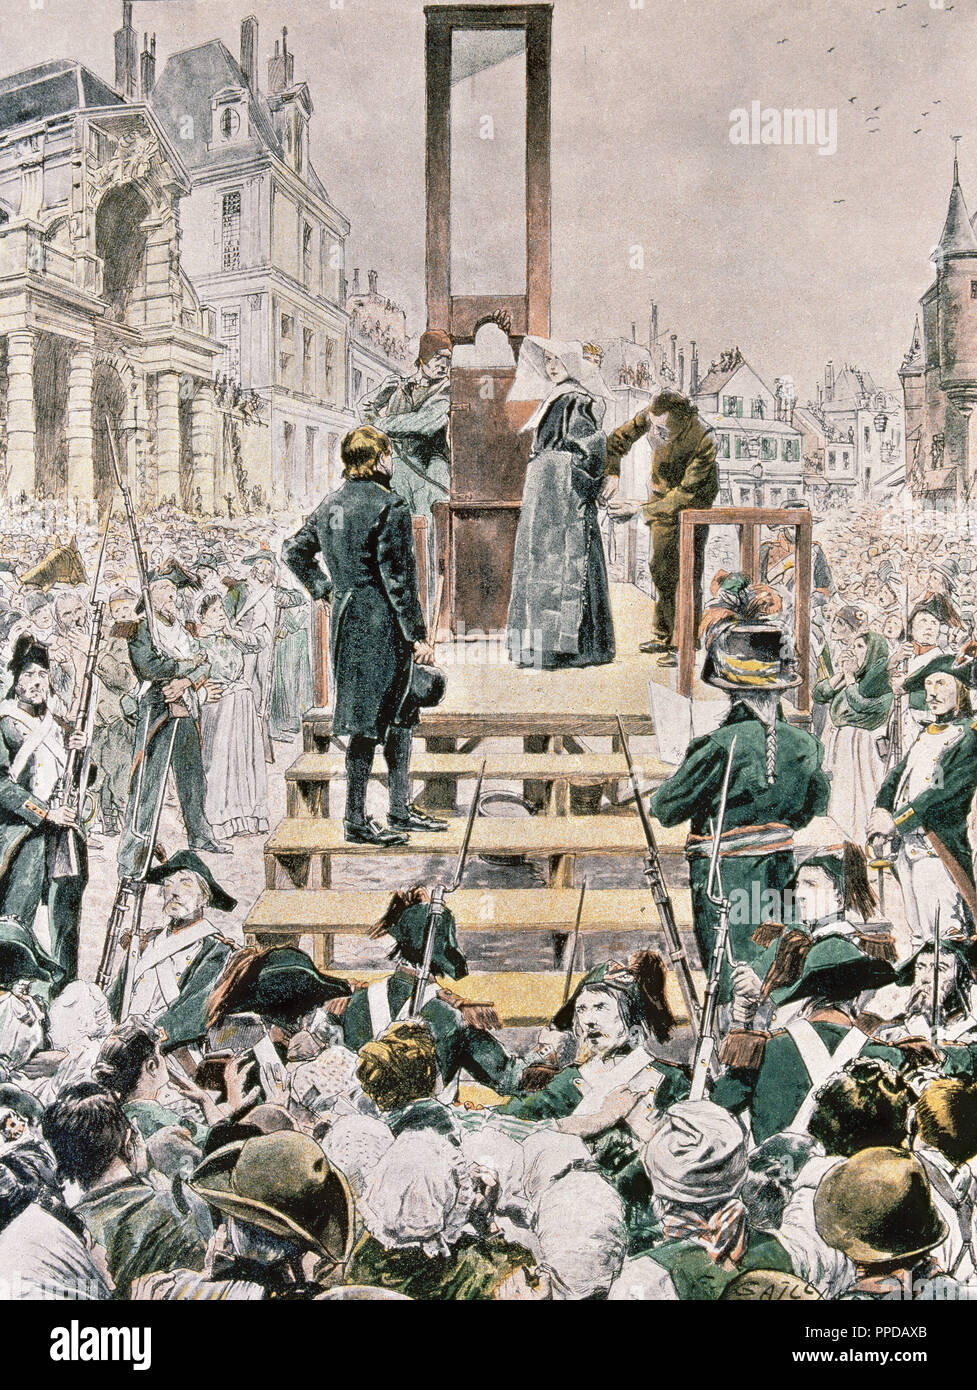 FRENCH REVOLUTION. An execution by guillotine. Sister Teresa on the scaffold to be guillotined in 1790. Colored engraving from 'L'Illustration', 1901. Stock Photo